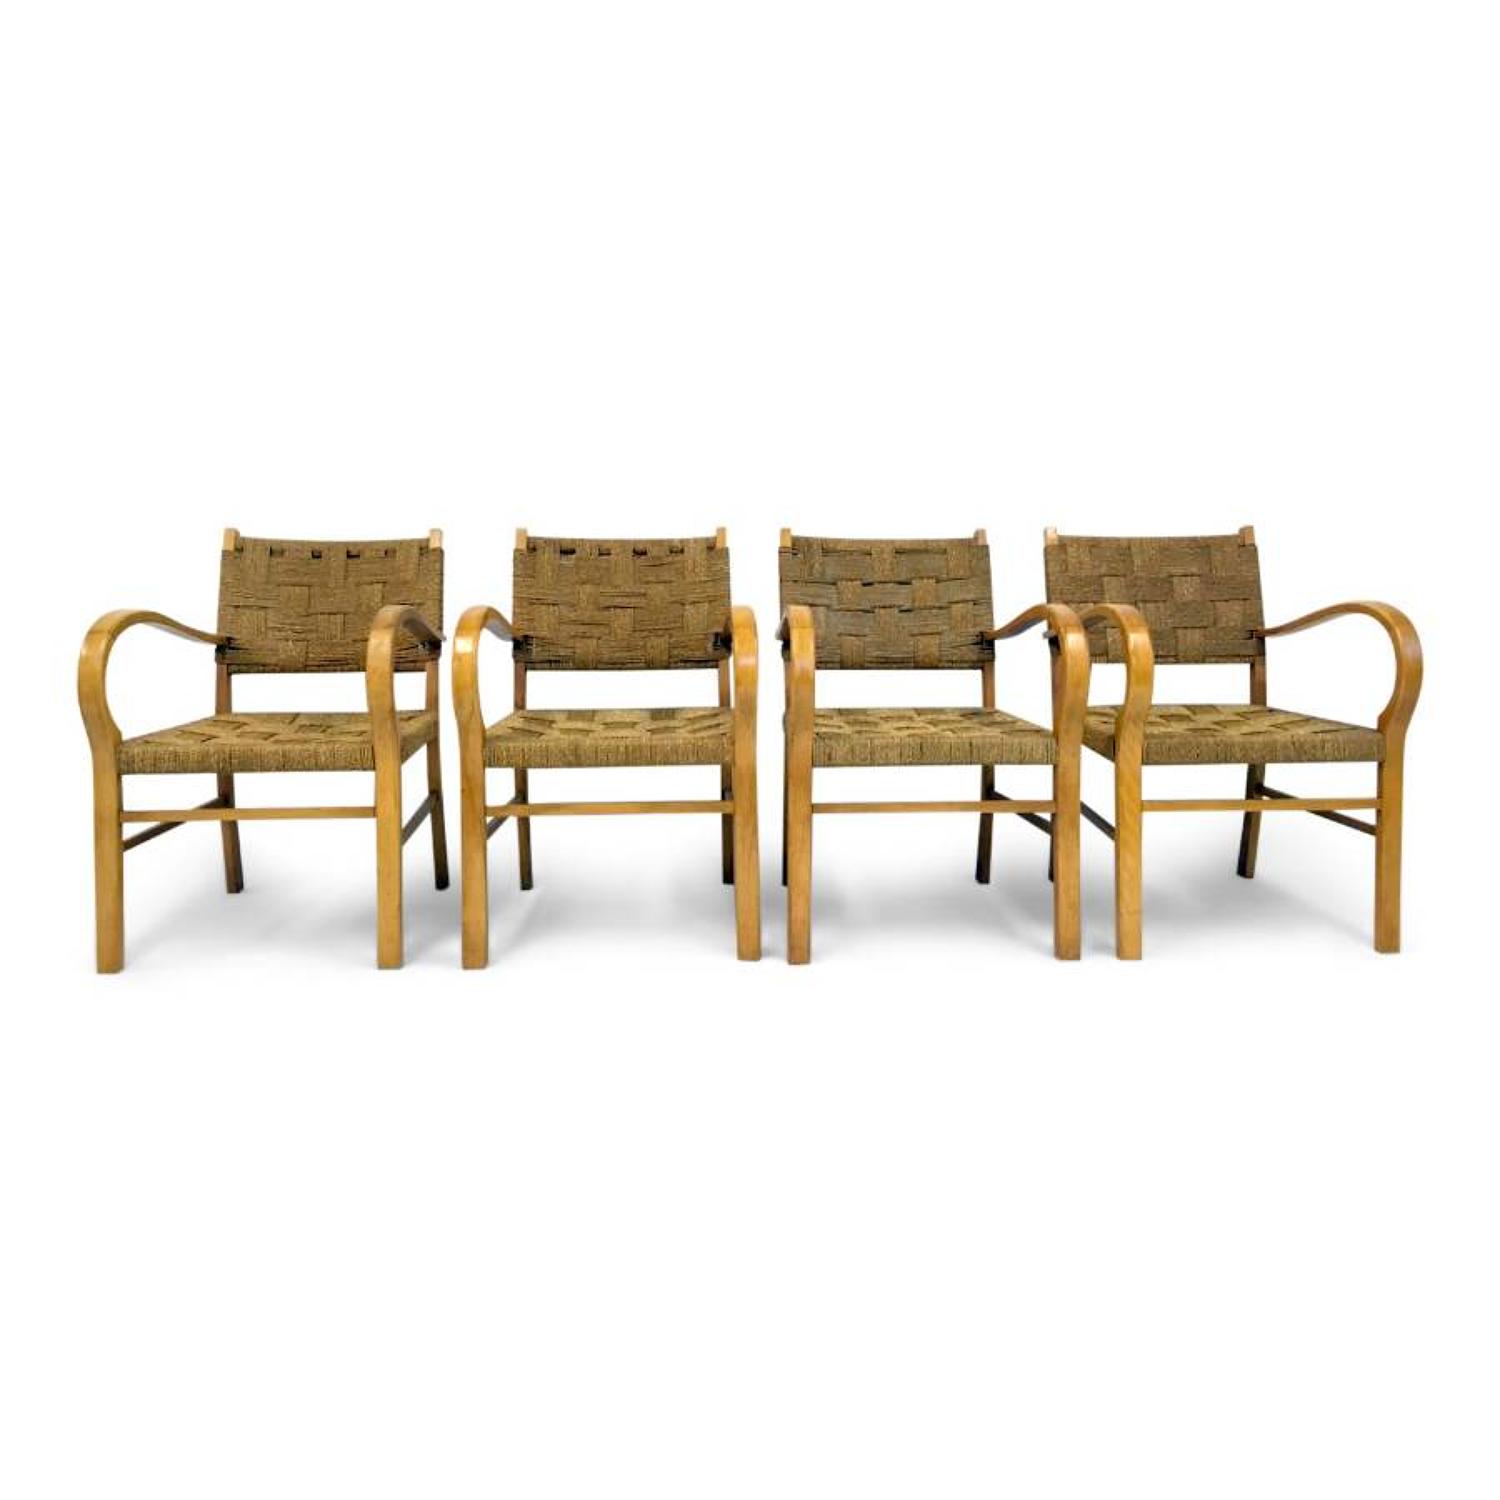 Four French 1950s beech and rope bridge chairs